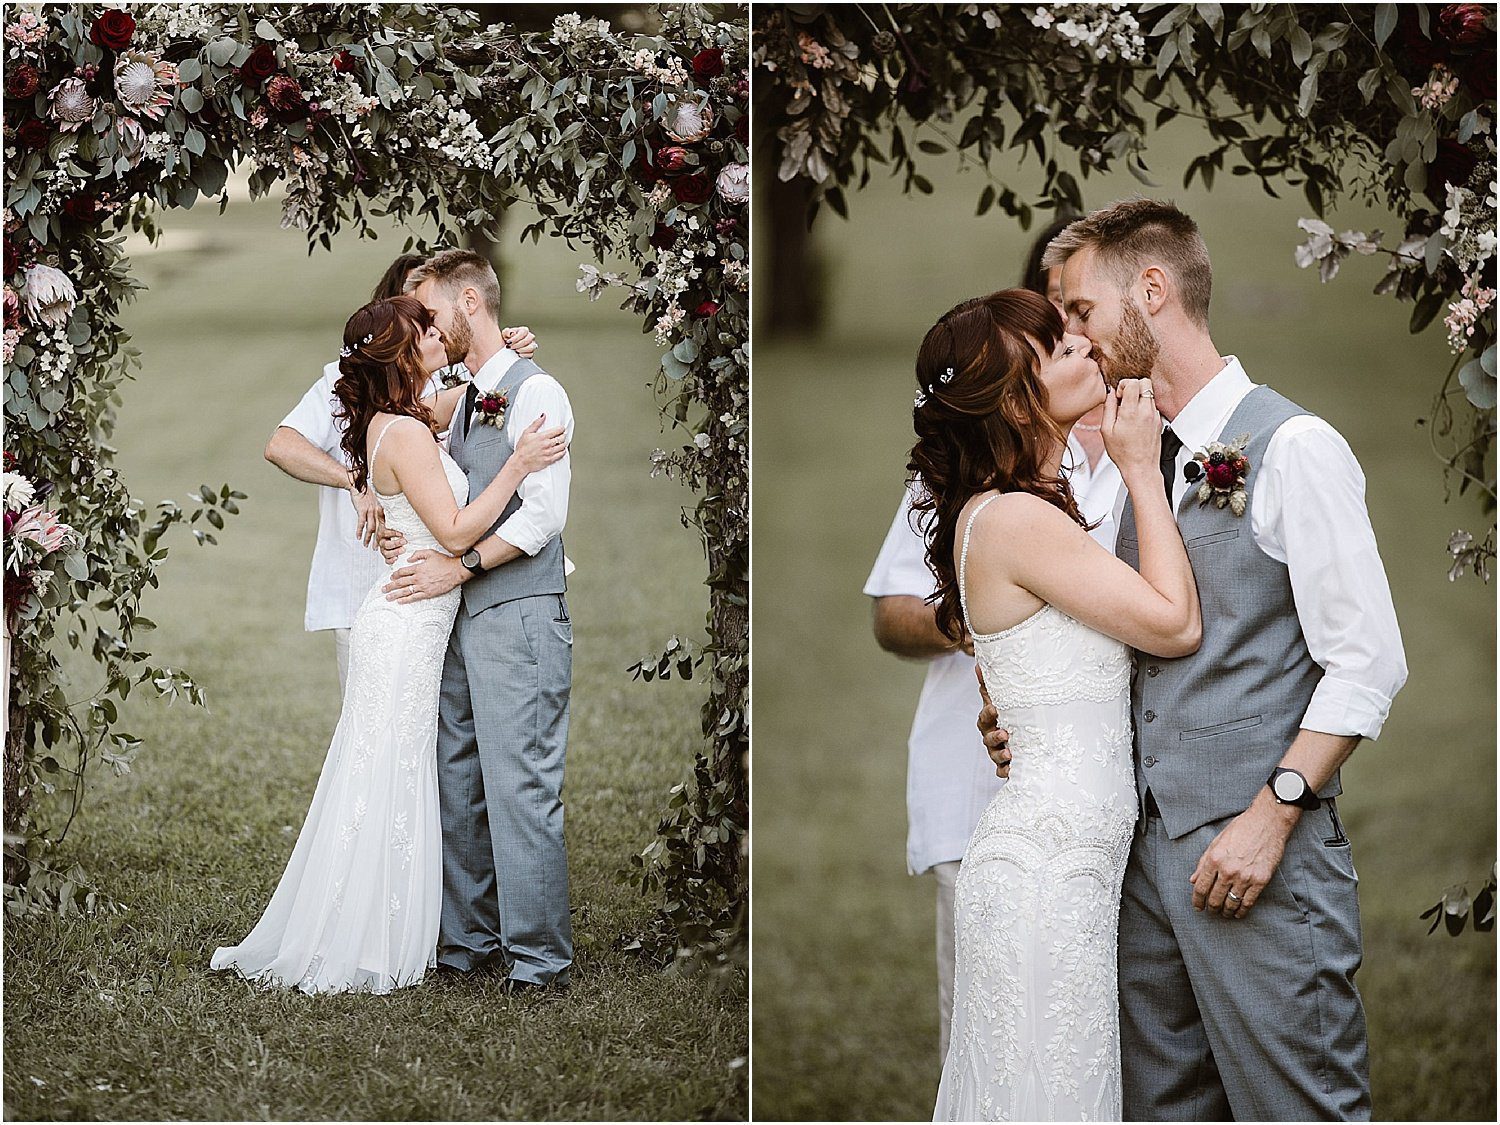 First Kiss at Ceremony at The Barn at Chestnut Springs